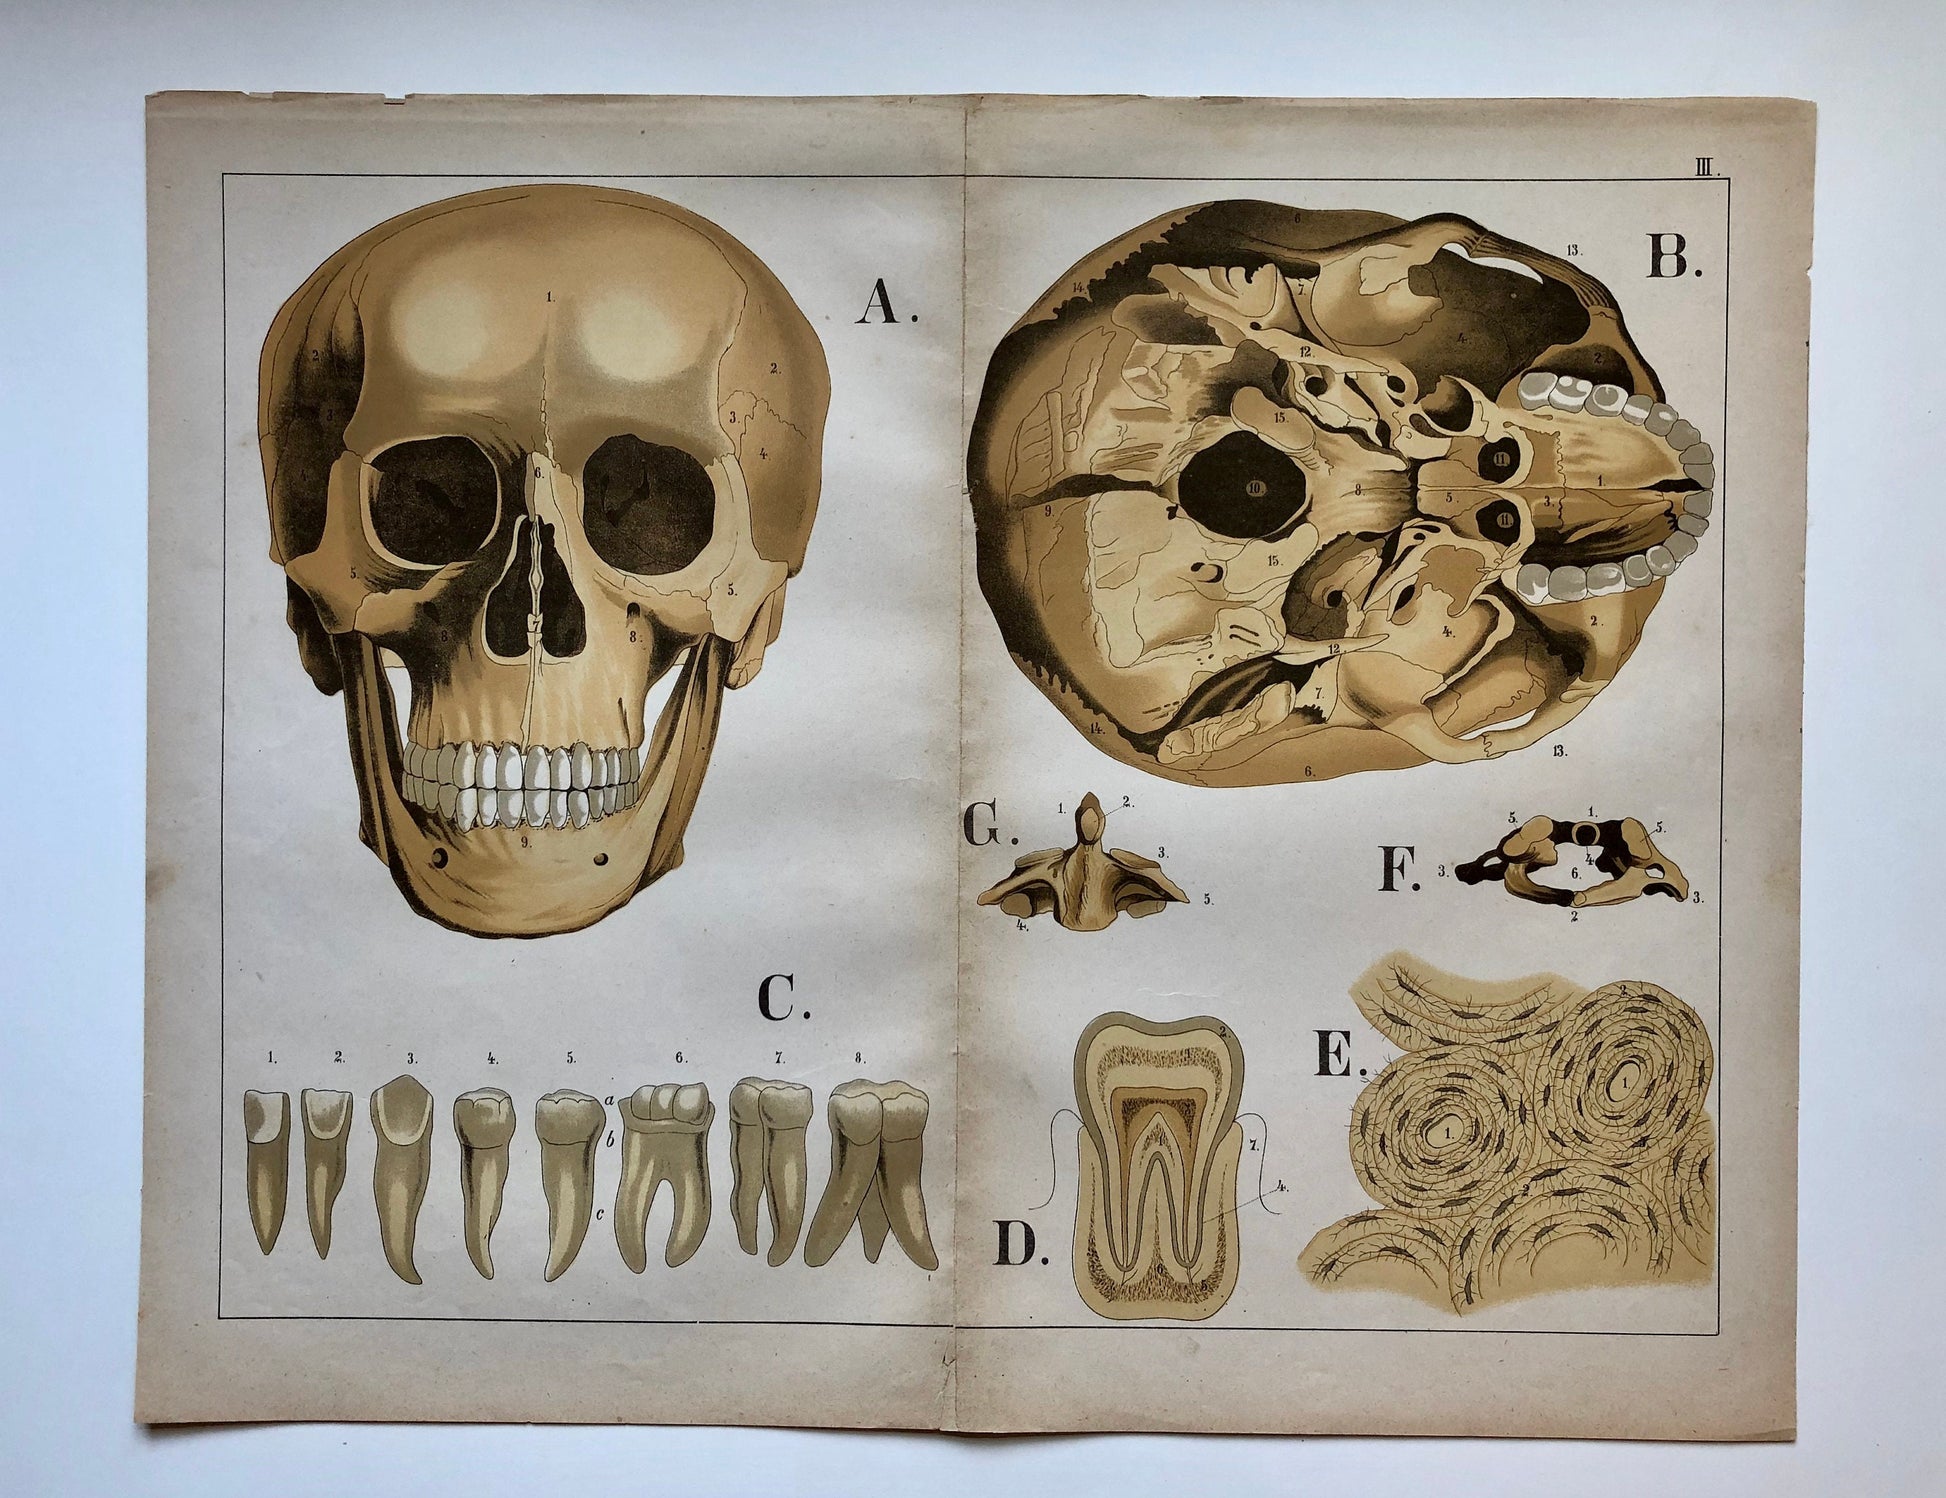 A Collection of 18 Original Antique Prints From The Atlas of Anatomy by Mrs Fenwick Miller. Rare items. Dated 1888. Large: 64 x 40 cms.